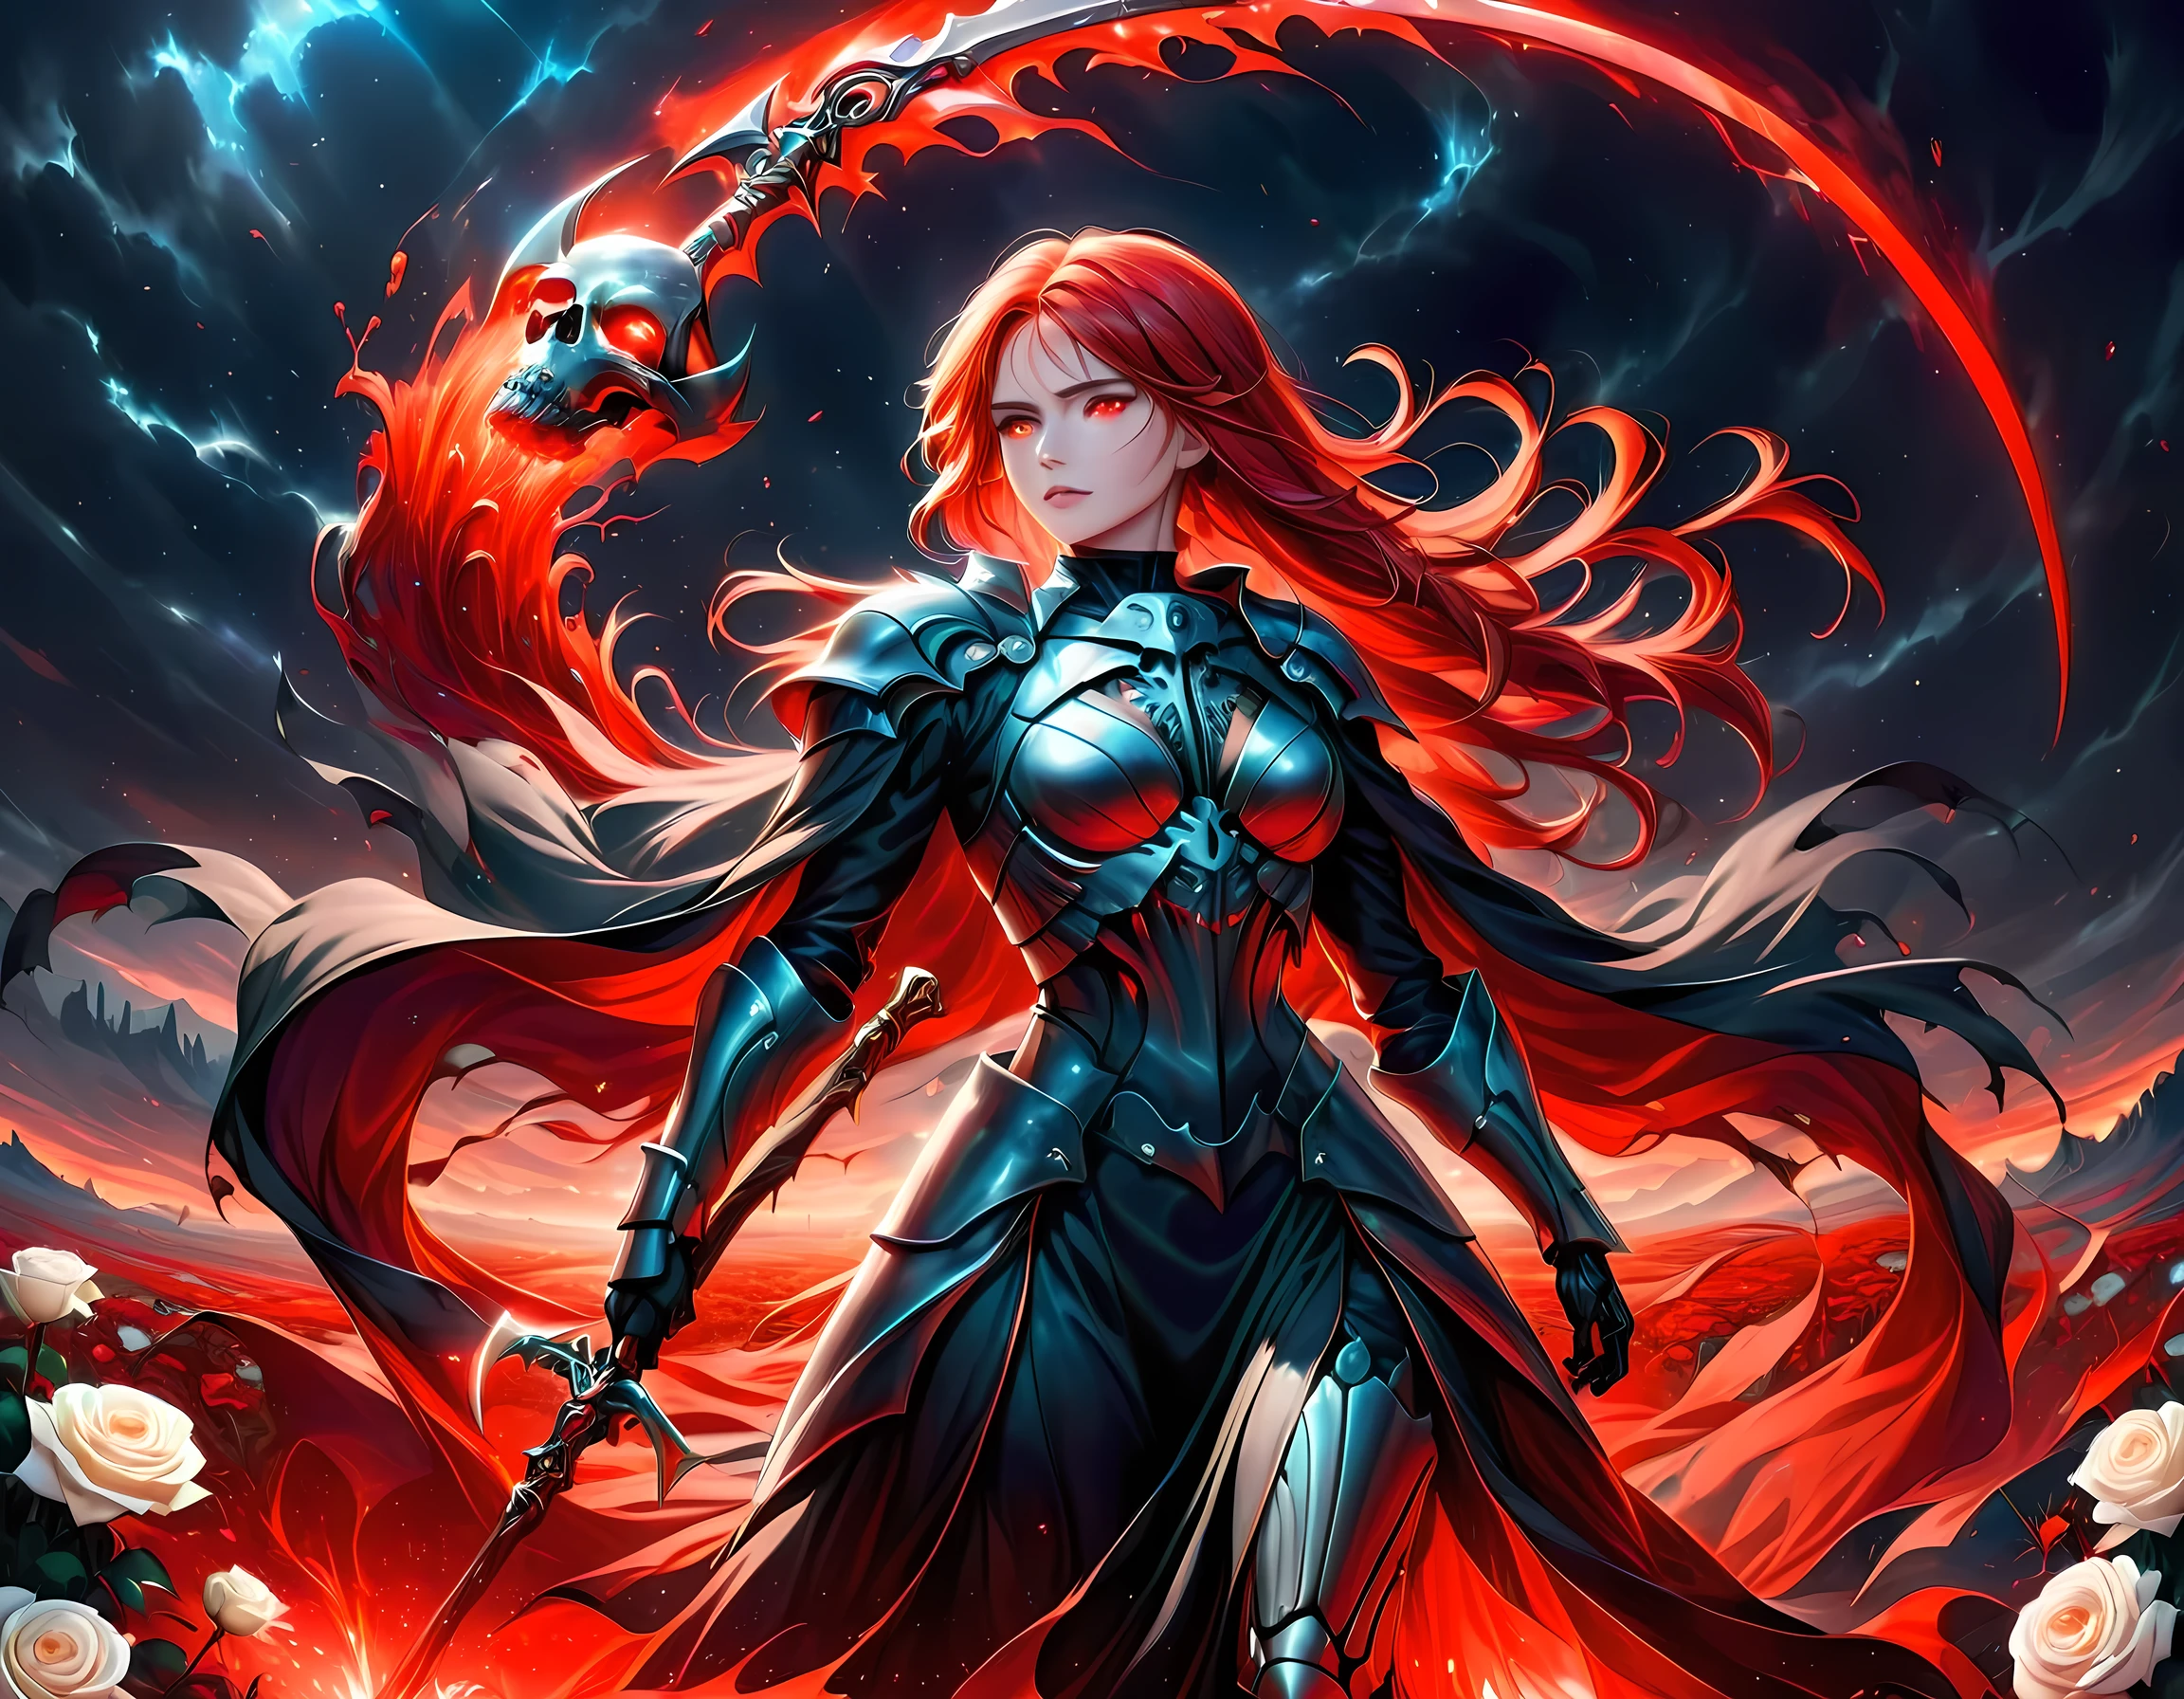 dark fantasy art, a female skeletal grim reaper in a field of white roses, the reaper has (skeletal head: 1.3) , long (red: 1.2) hair , red glowing eyes, she wears black robes, and black armor dress, ArmoredDress, flowing robes, she holds a scythe, in her arms, the scythe is dripping blood, a field of white roses background (best details, Masterpiece, best quality: 1.4), dynamic range, ultra wide shot, photorealism, depth of field, hyper realistic, RagingNebula